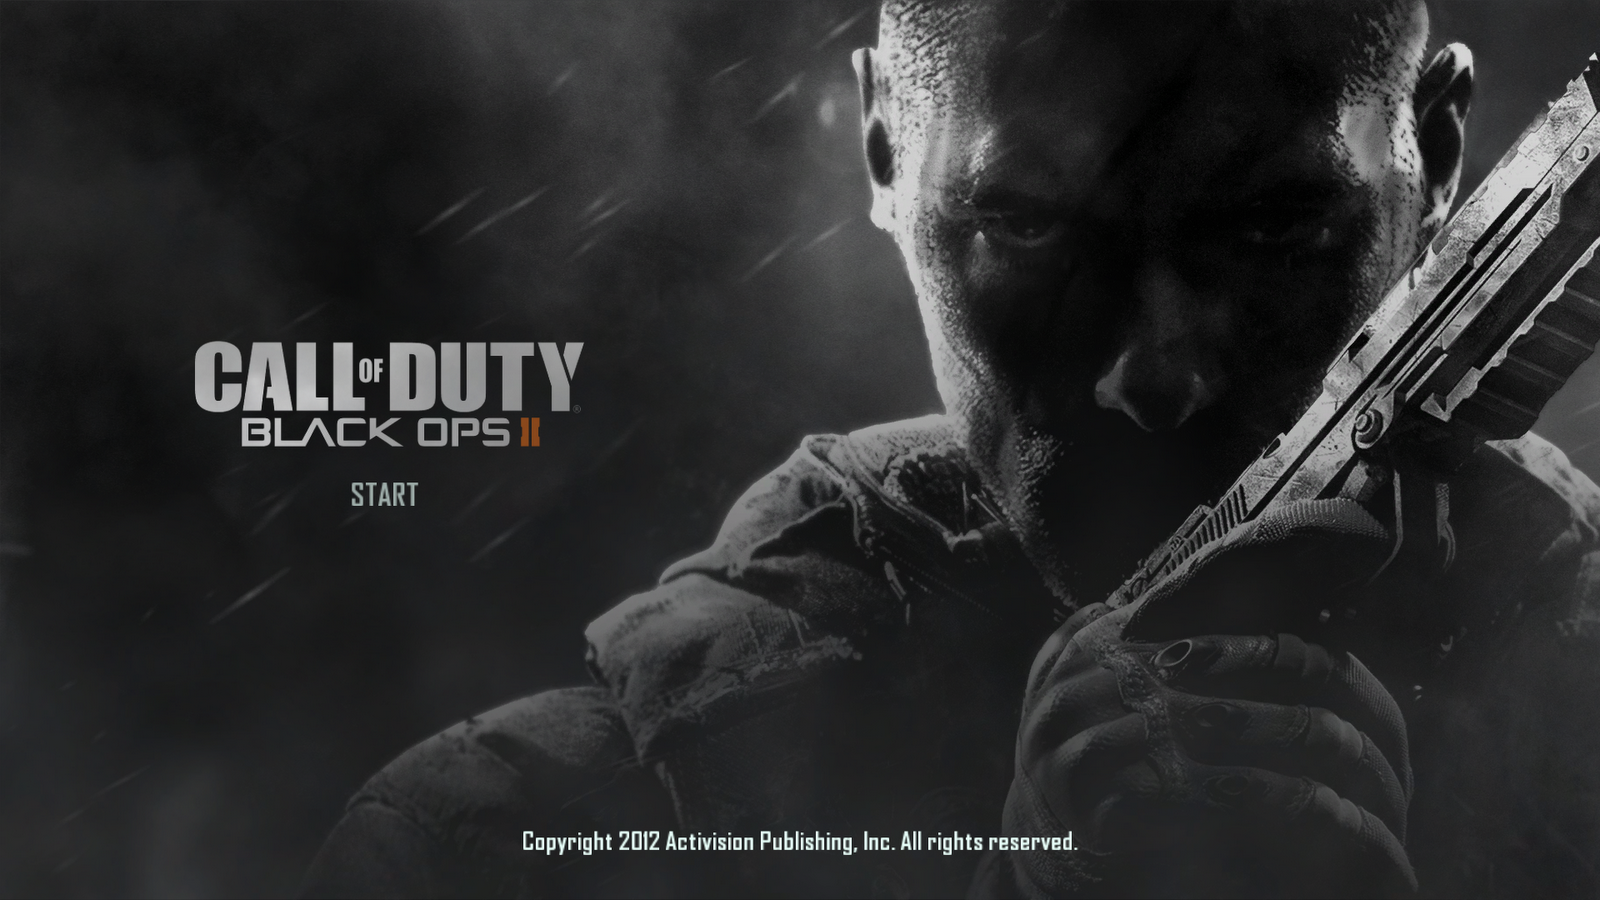  8iSkuKFDbsYs1600Call of duty black ops 2 wallpapers hd2png 1600x900